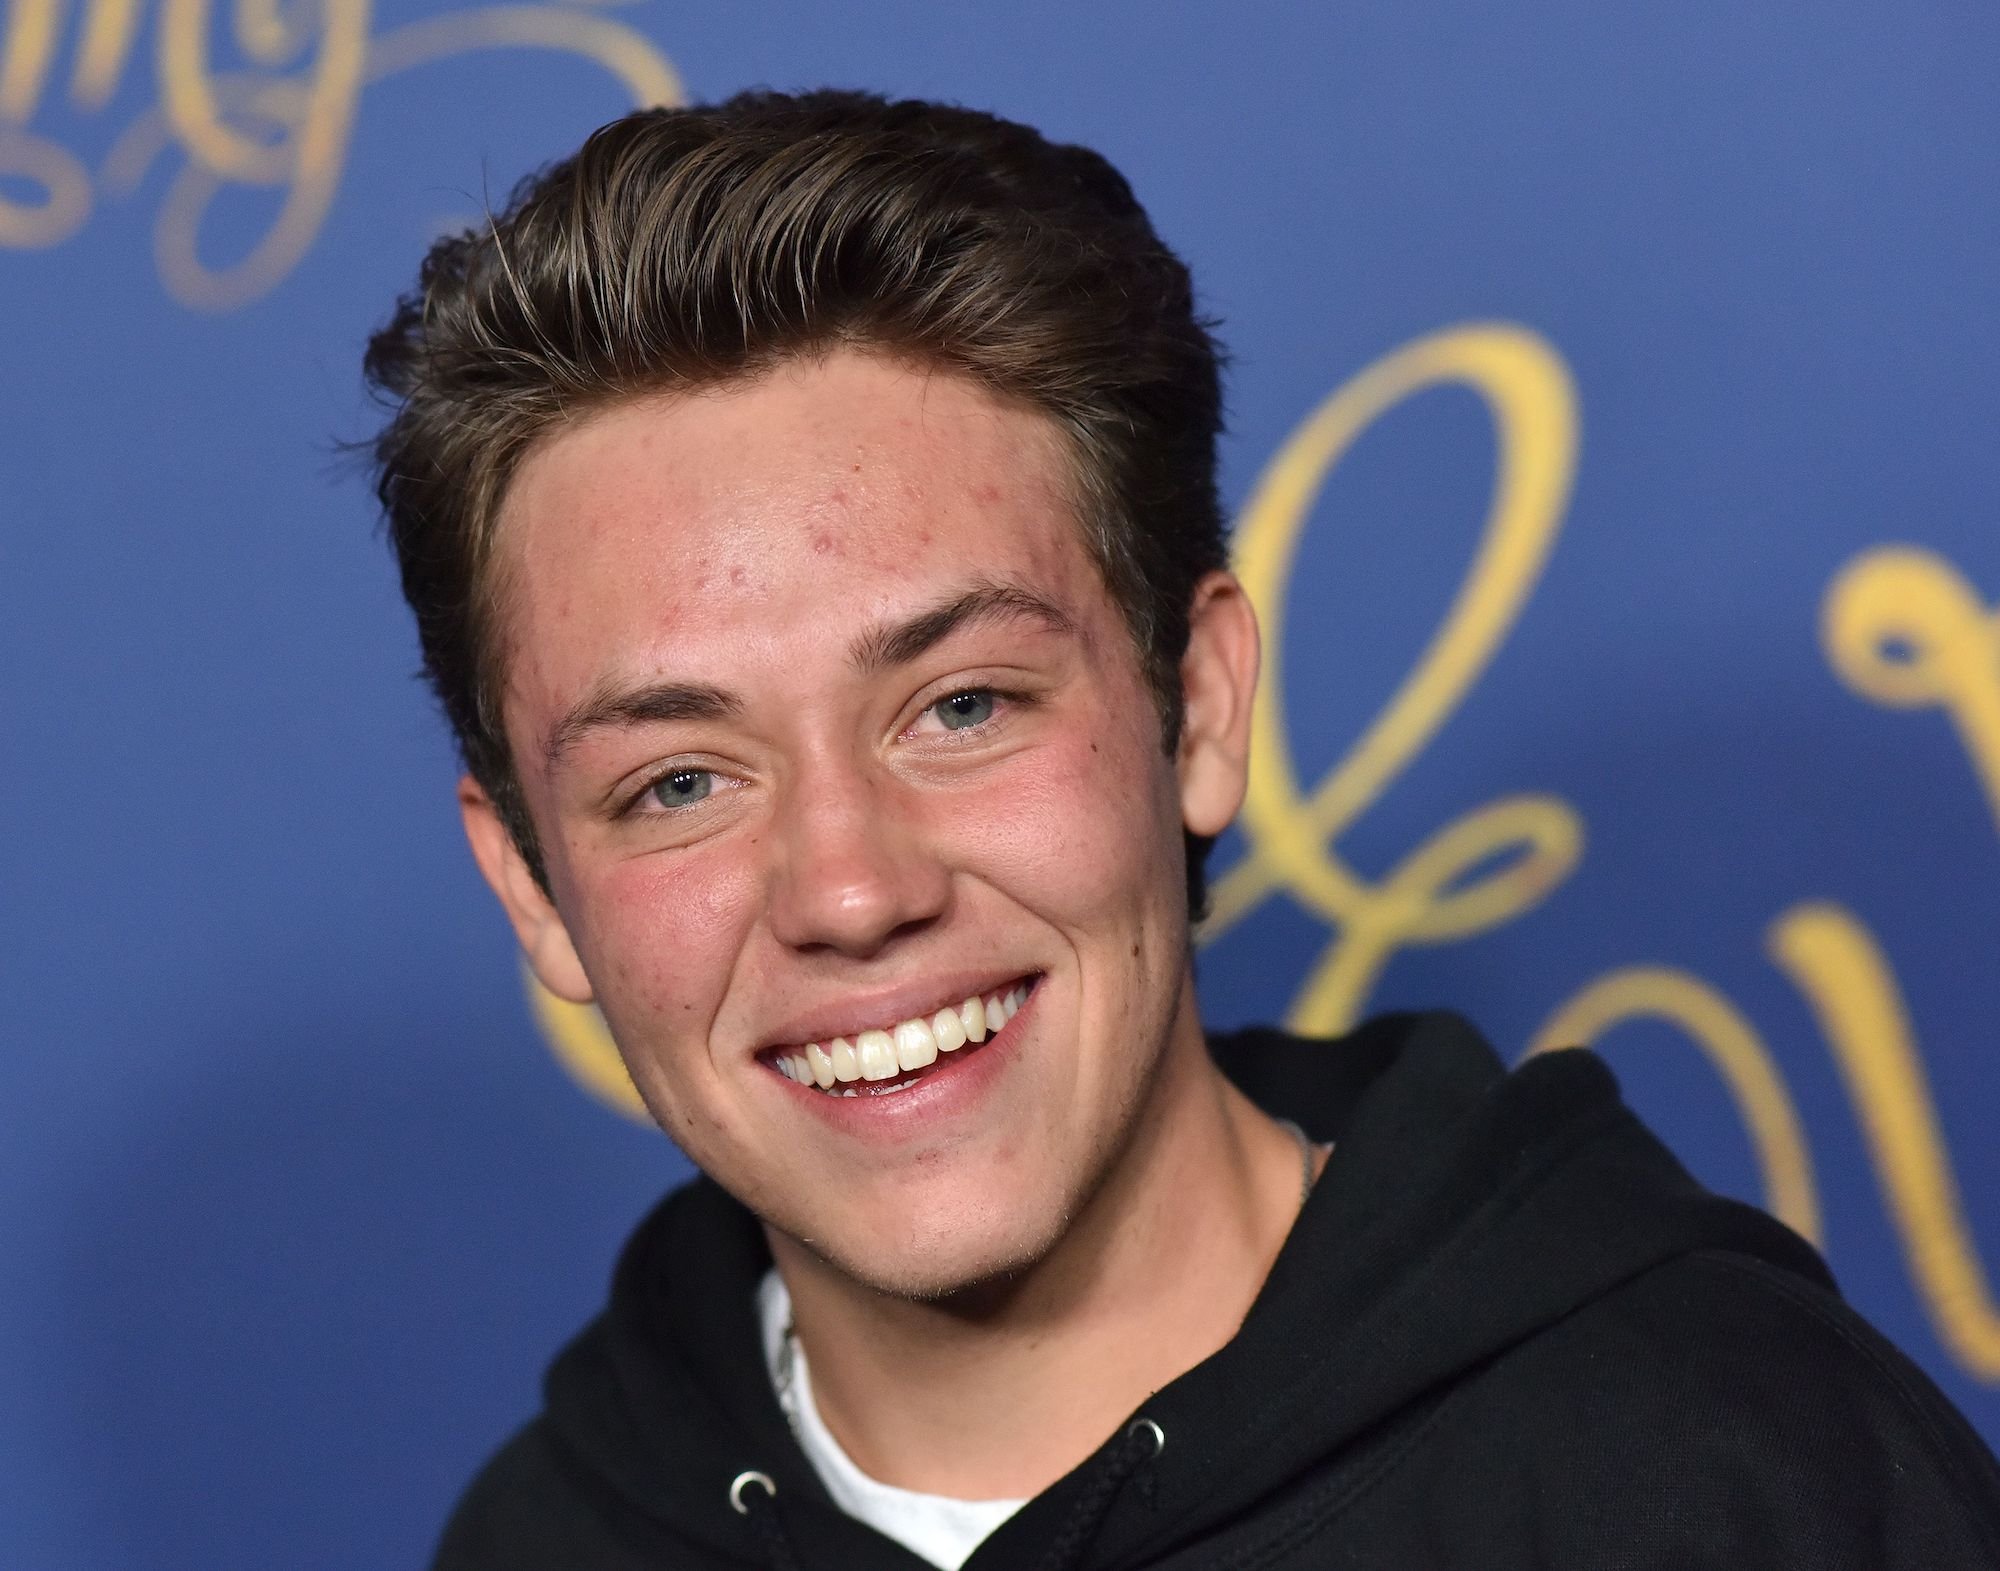 Is ‘Shameless’ Actor Ethan Cutkosky Related to Lil Xan?